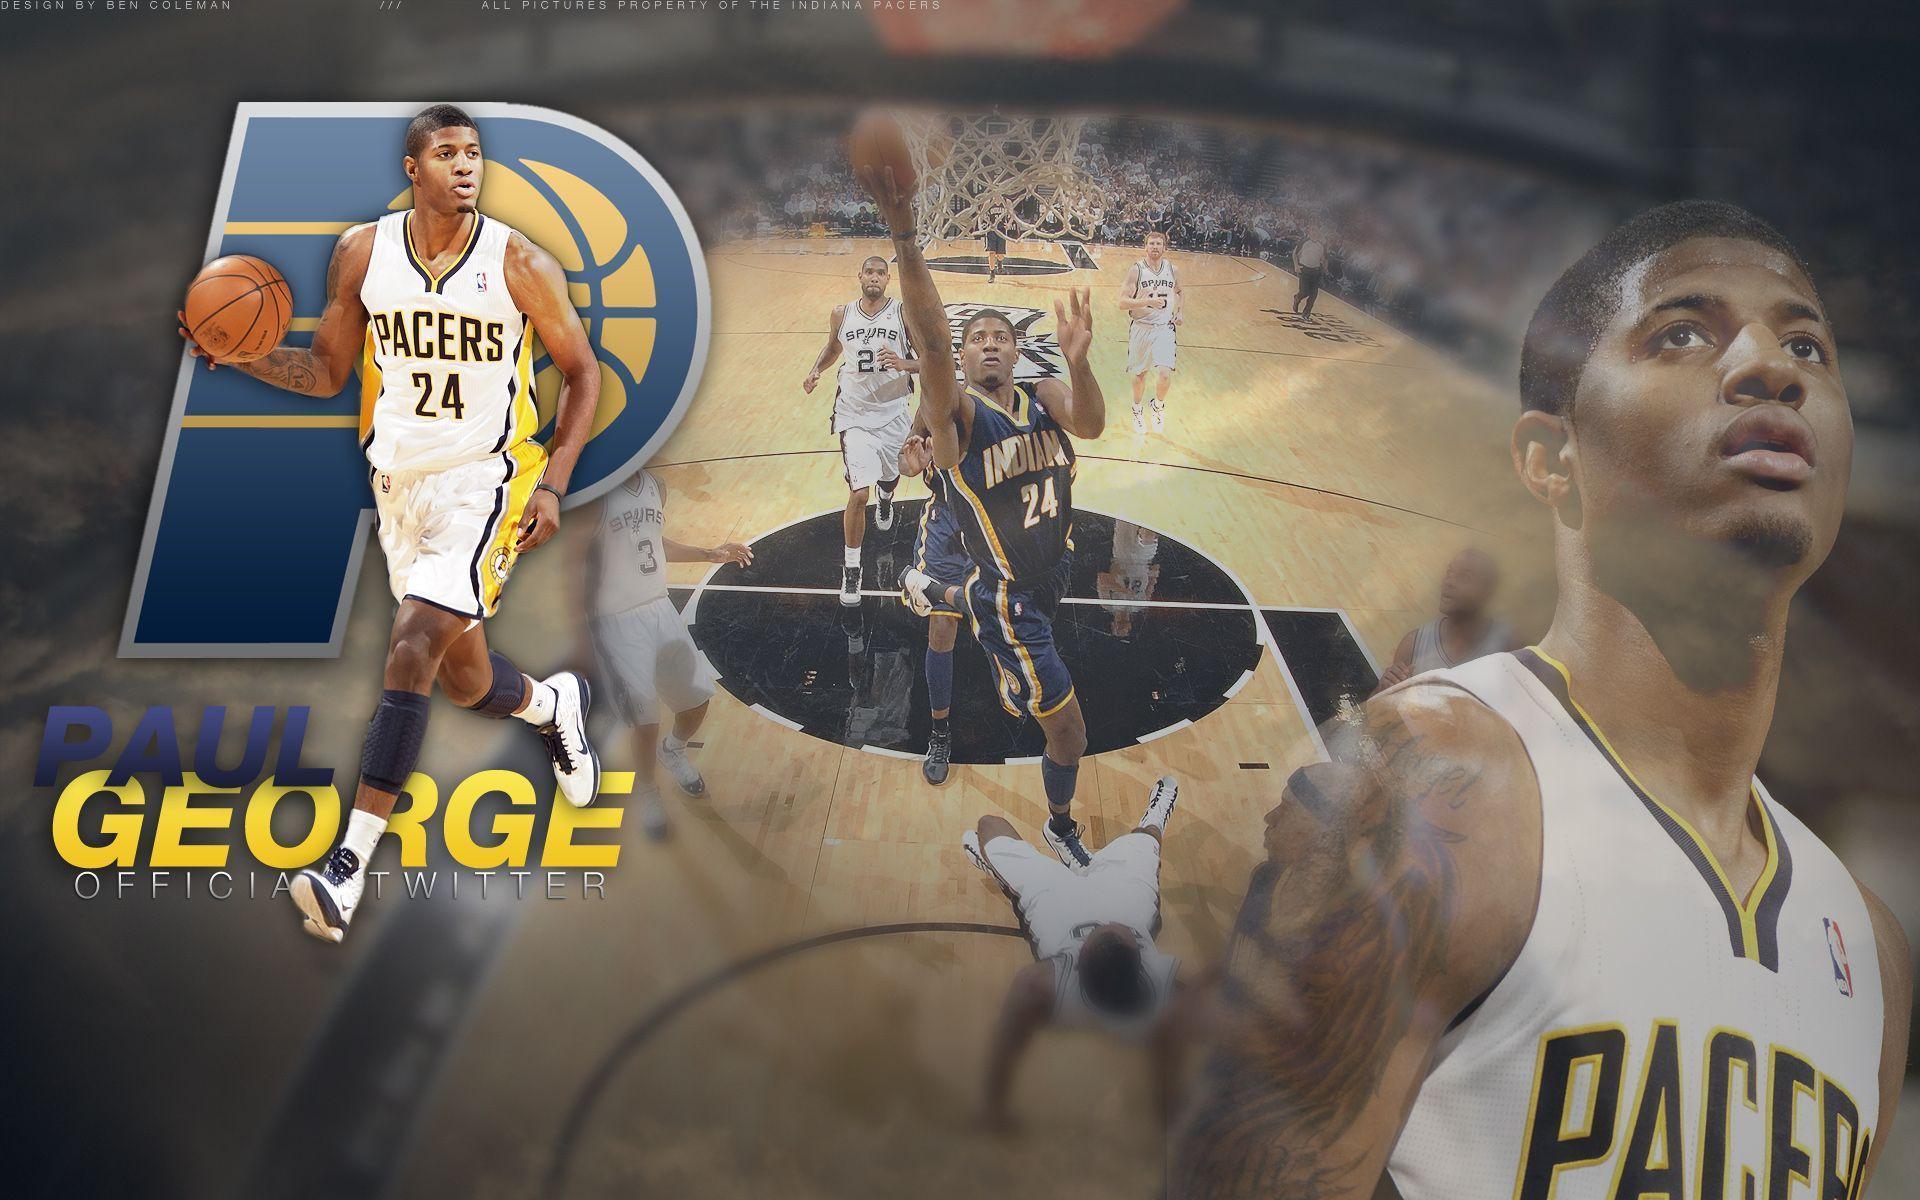 Paul George Official Twitter